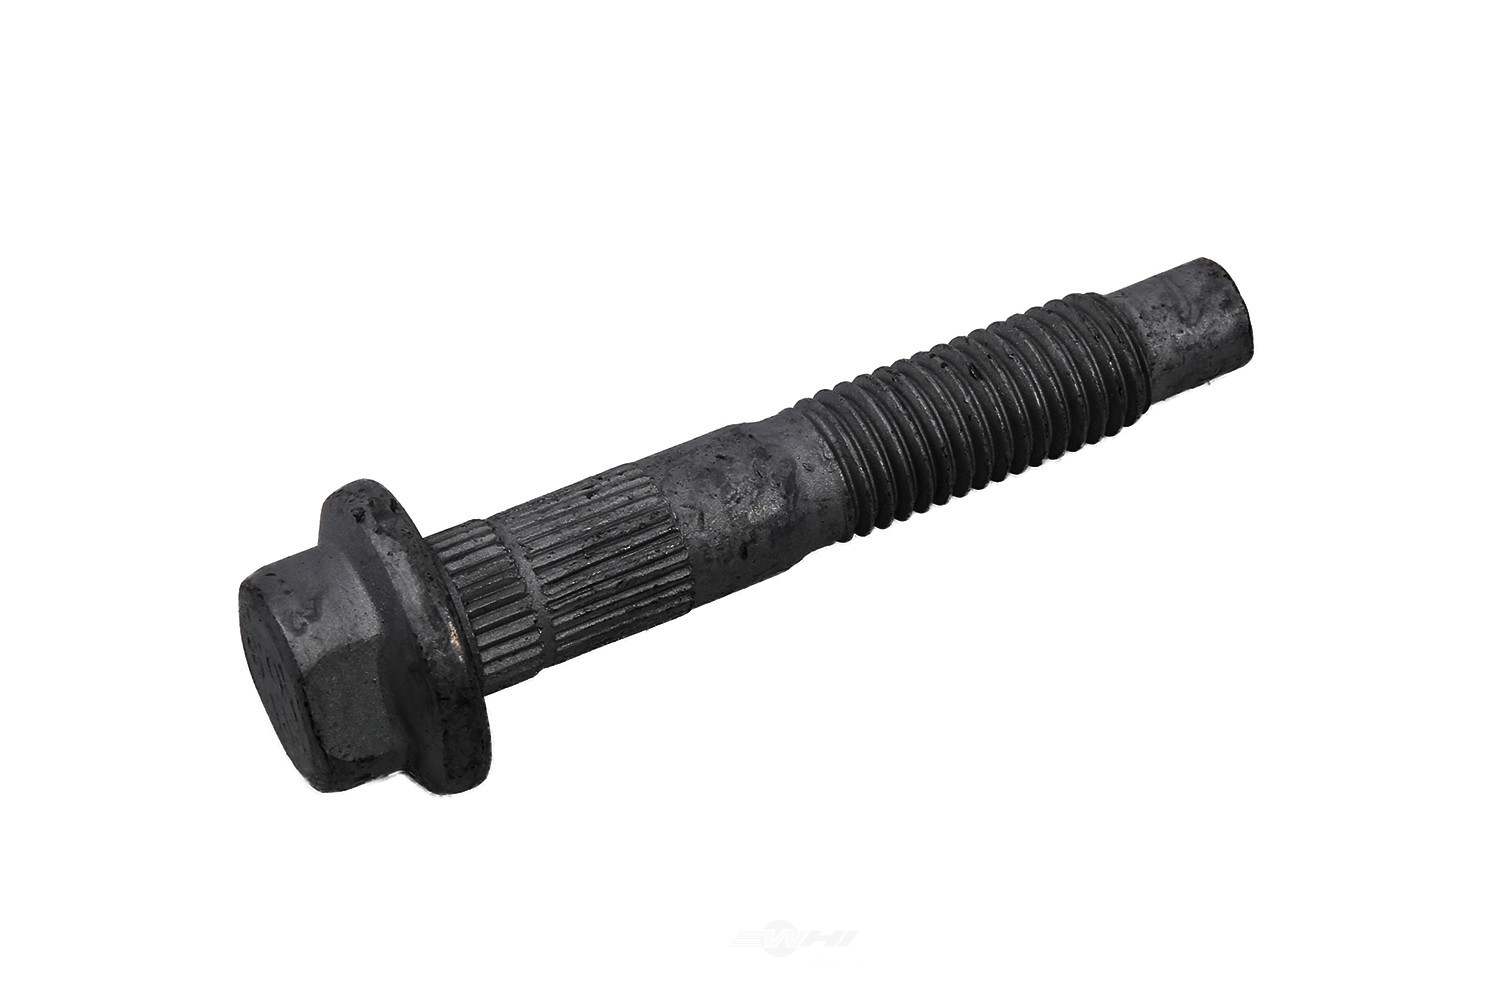 GM GENUINE PARTS - Steering Knuckle Bolt - GMP 10247637